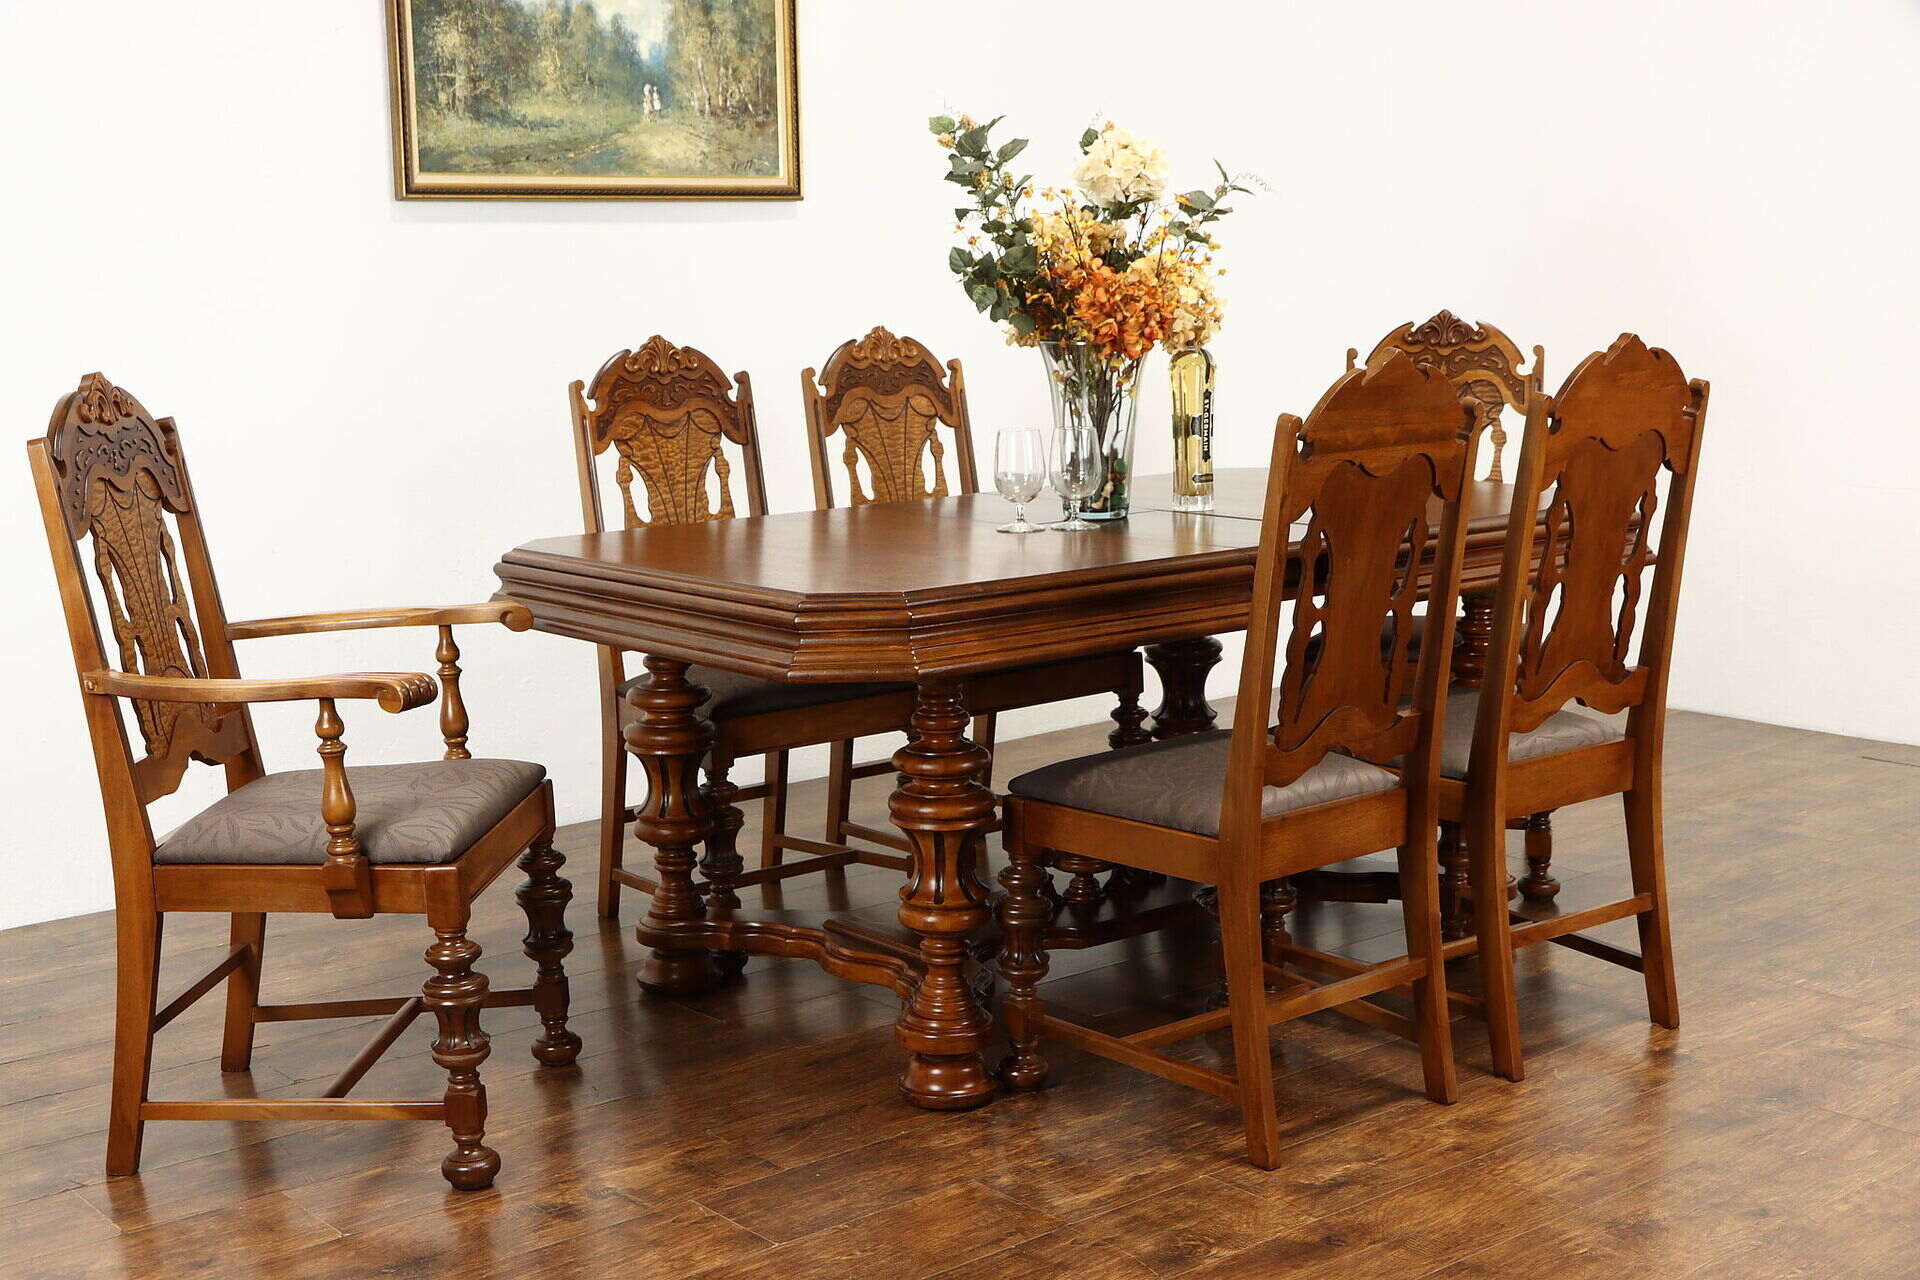 How To Style A Non-Traditional Antique Mahogany Dining Room Table